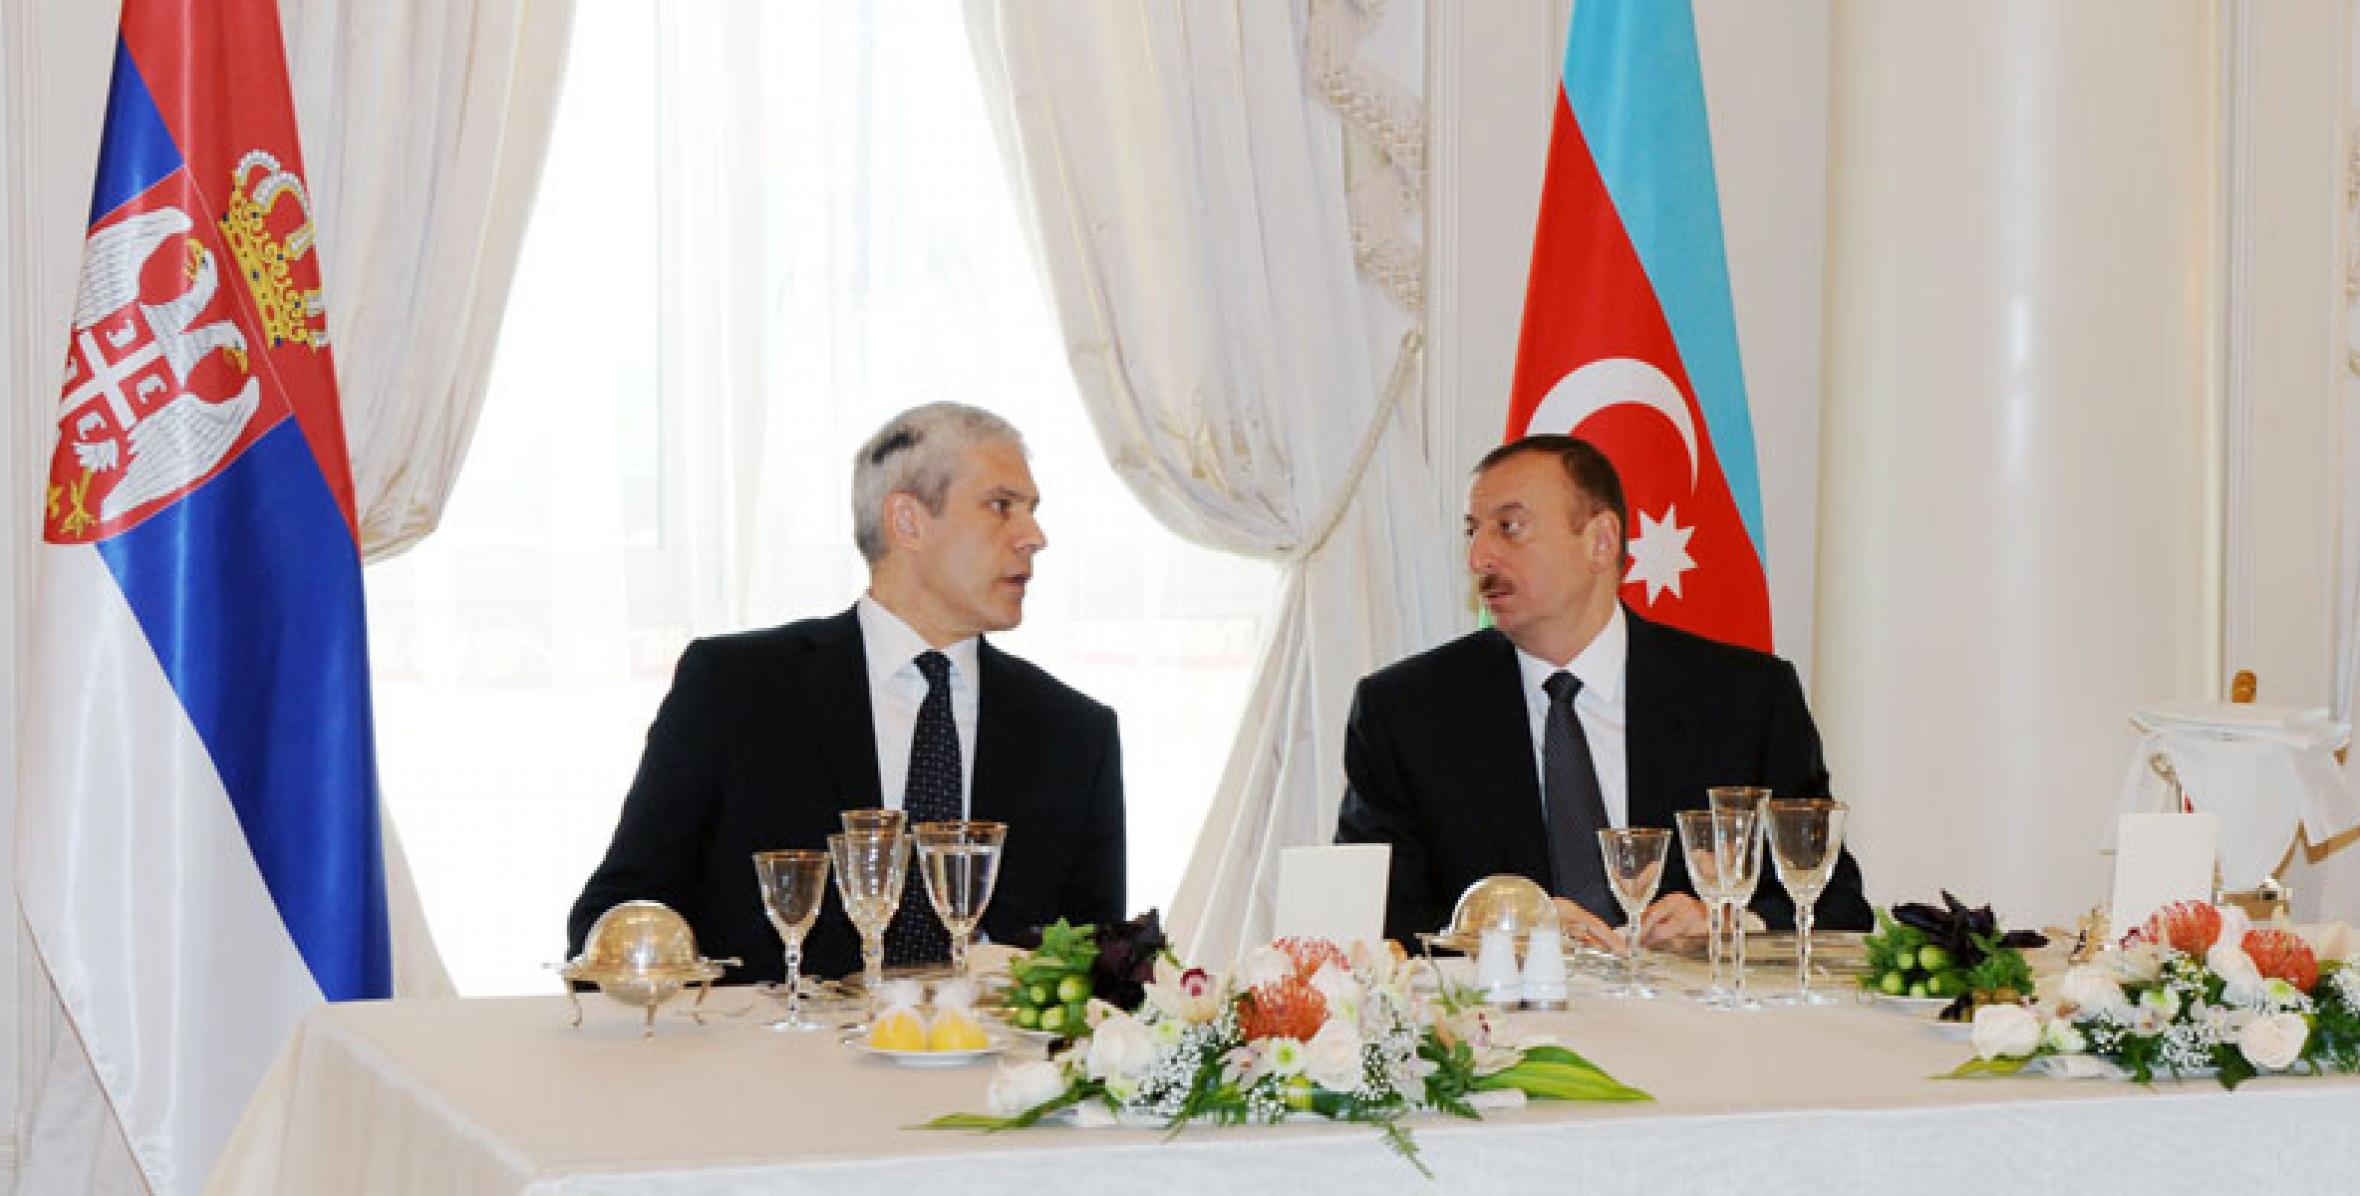 Ilham Aliyev hosted an official dinner in honor of Serbian President Boris Tadic